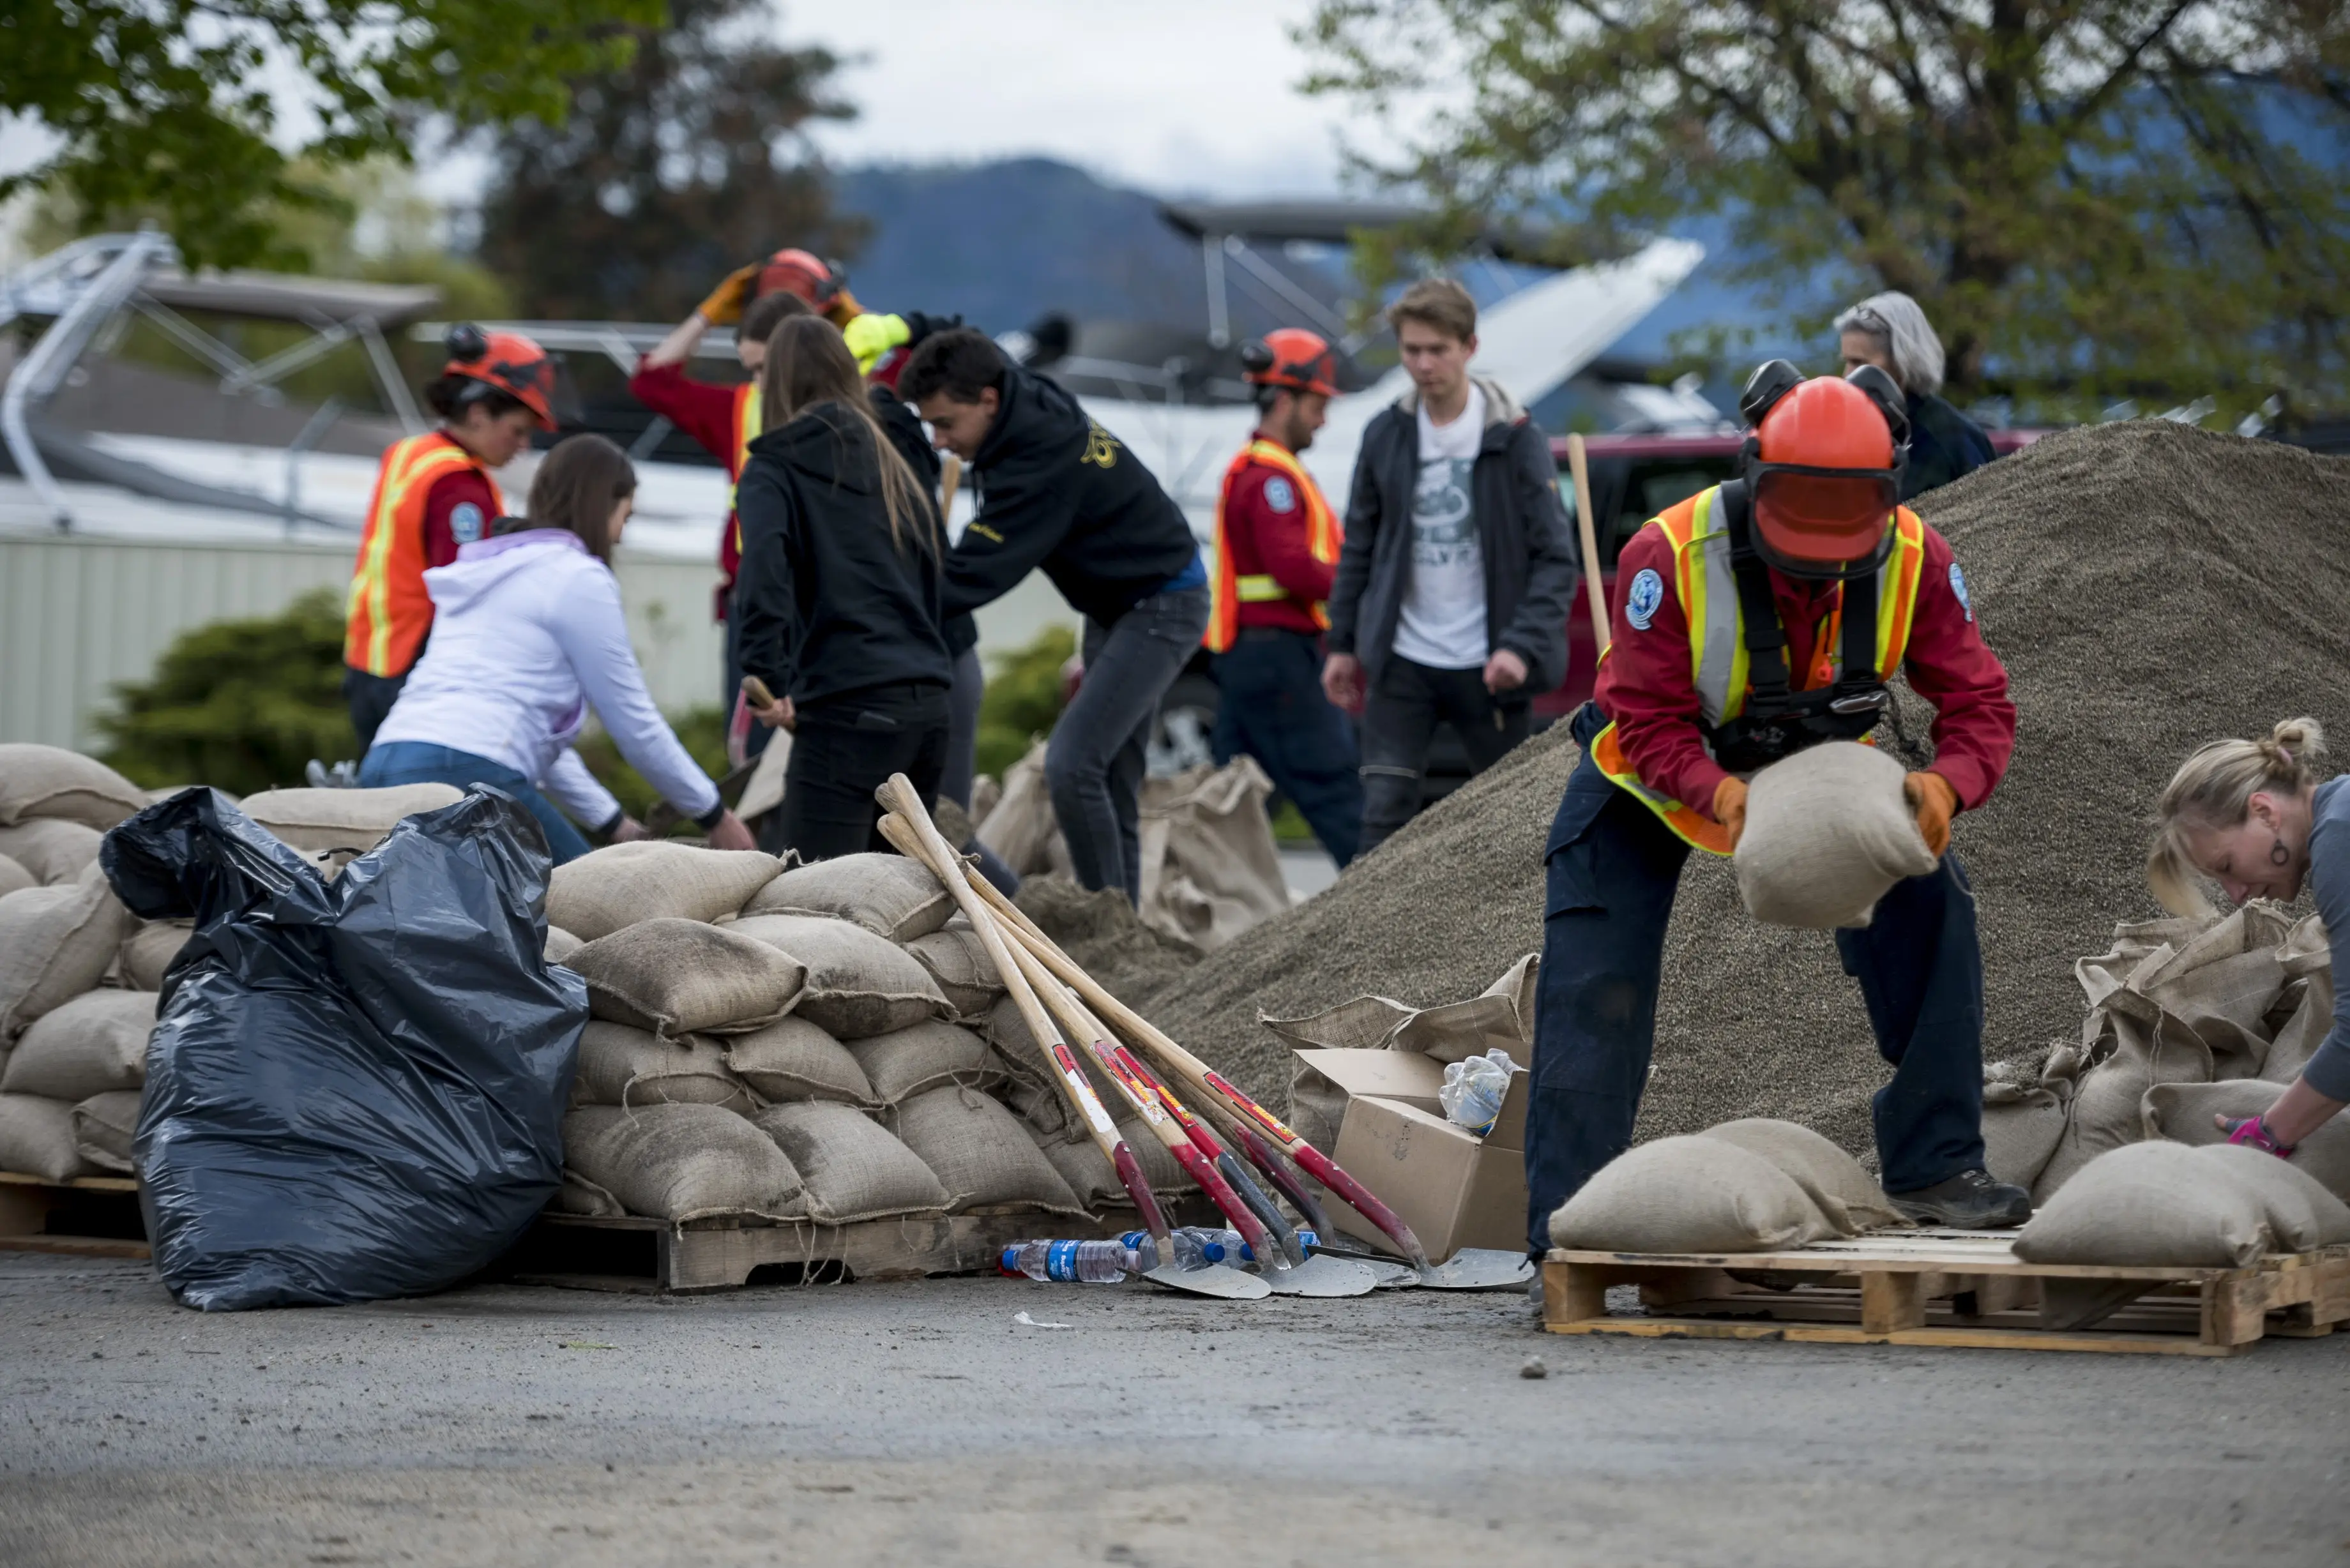 Volunteers filling sandbags at a flood prevention effort with piles of sand and tools around, in a community setting.